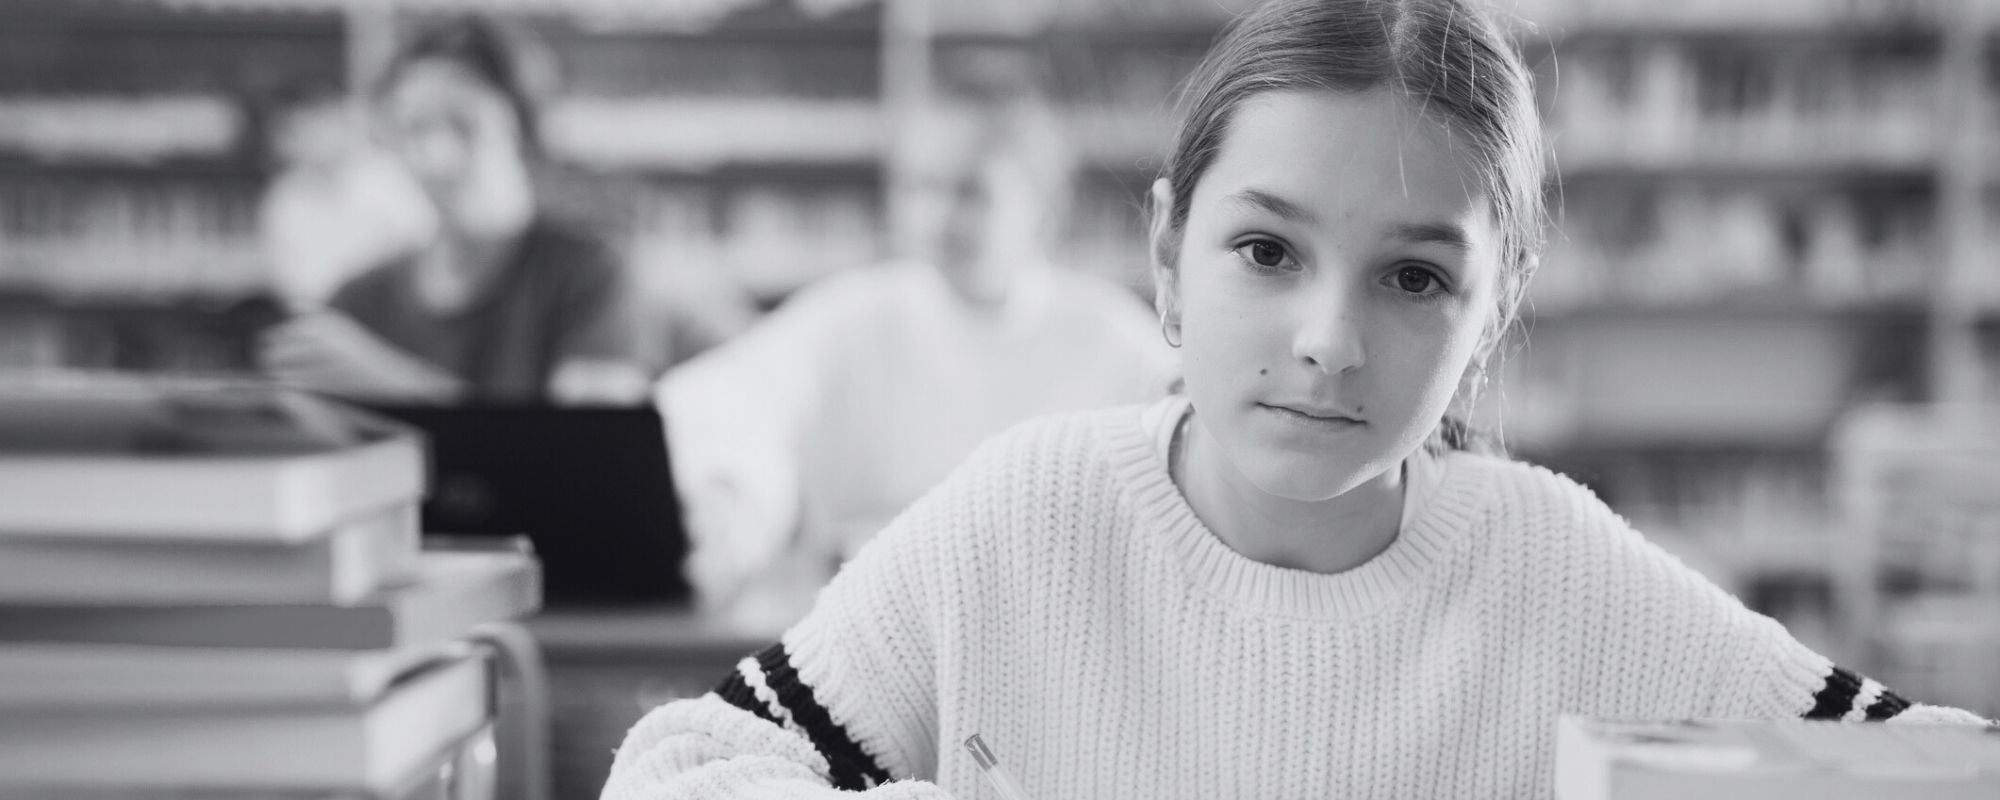 Middle school student, girl, in sitting in library, staring directly at camera, serious